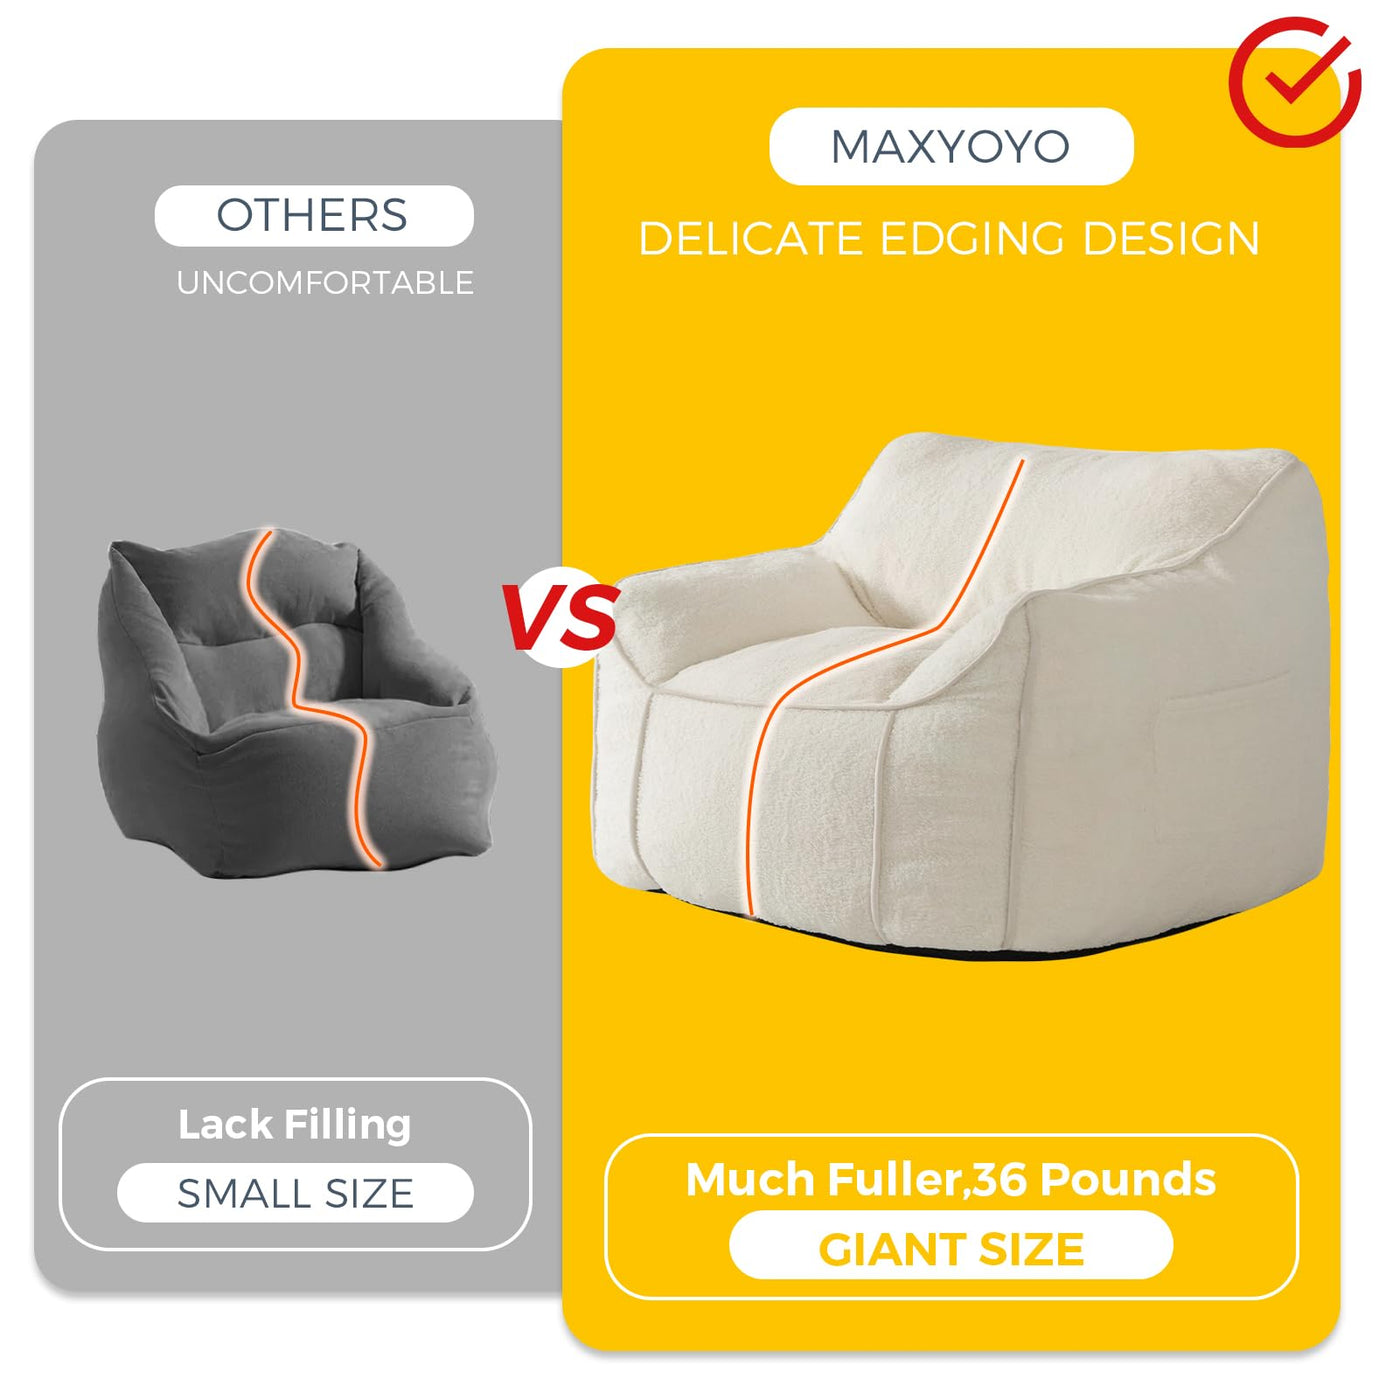 MAXYOYO Giant Bean Bag Chair for Adults, Large Fluffy Bean Bag Couch for Living Room with Decorative Edges, White